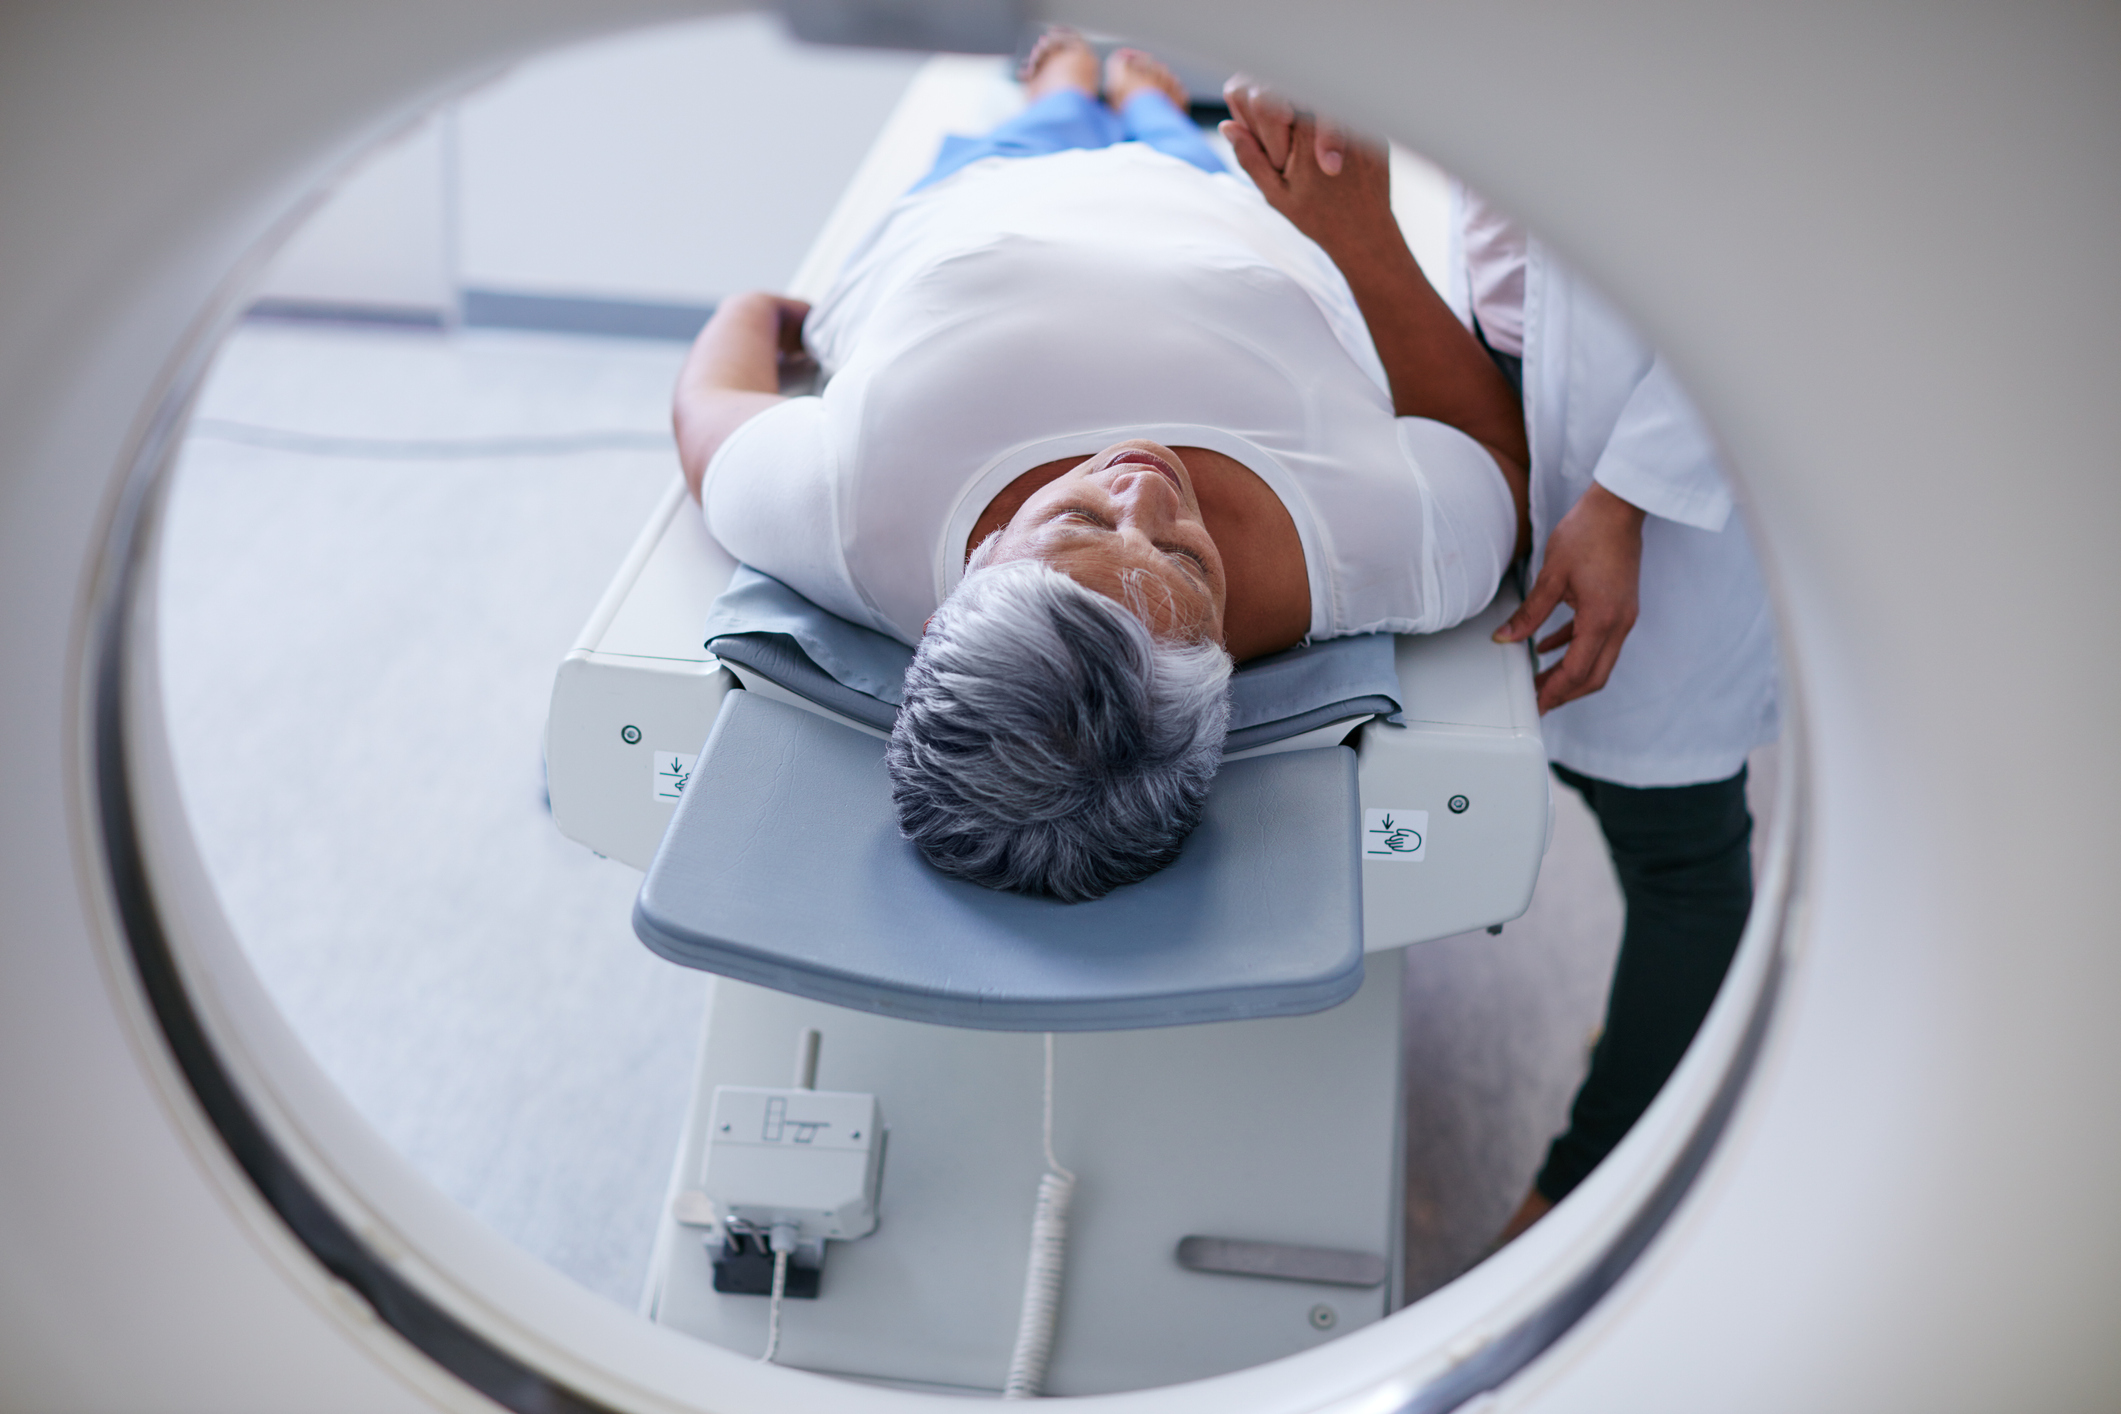 What Patients Can Expect When Their Doctor Orders an MRI